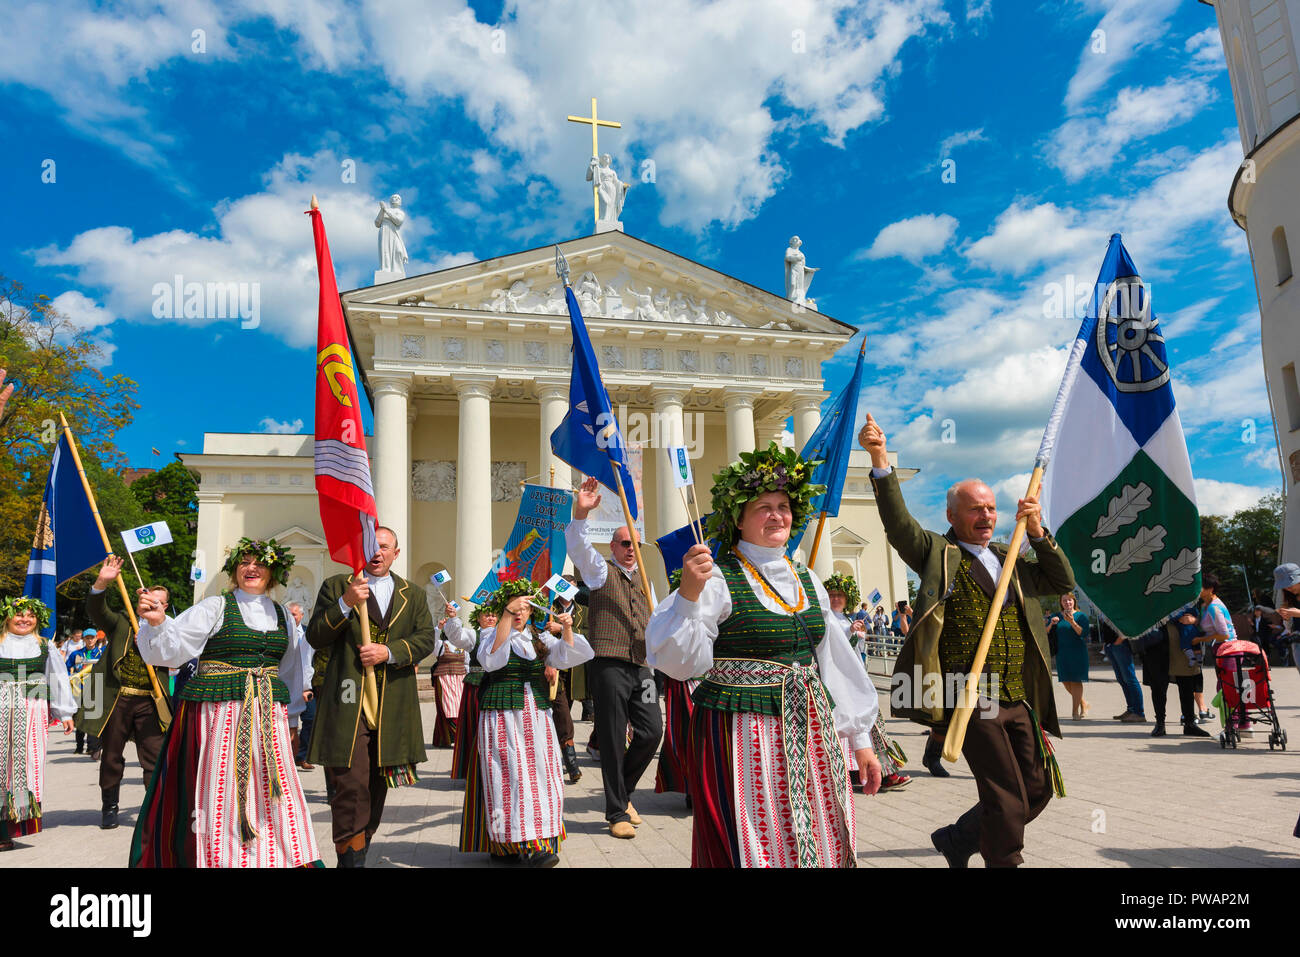 Baltic festival, view of people from the town of Kelme dressed in traditional costume parading in the Lithuania Song and Dance Festival in Vilnius. Stock Photo